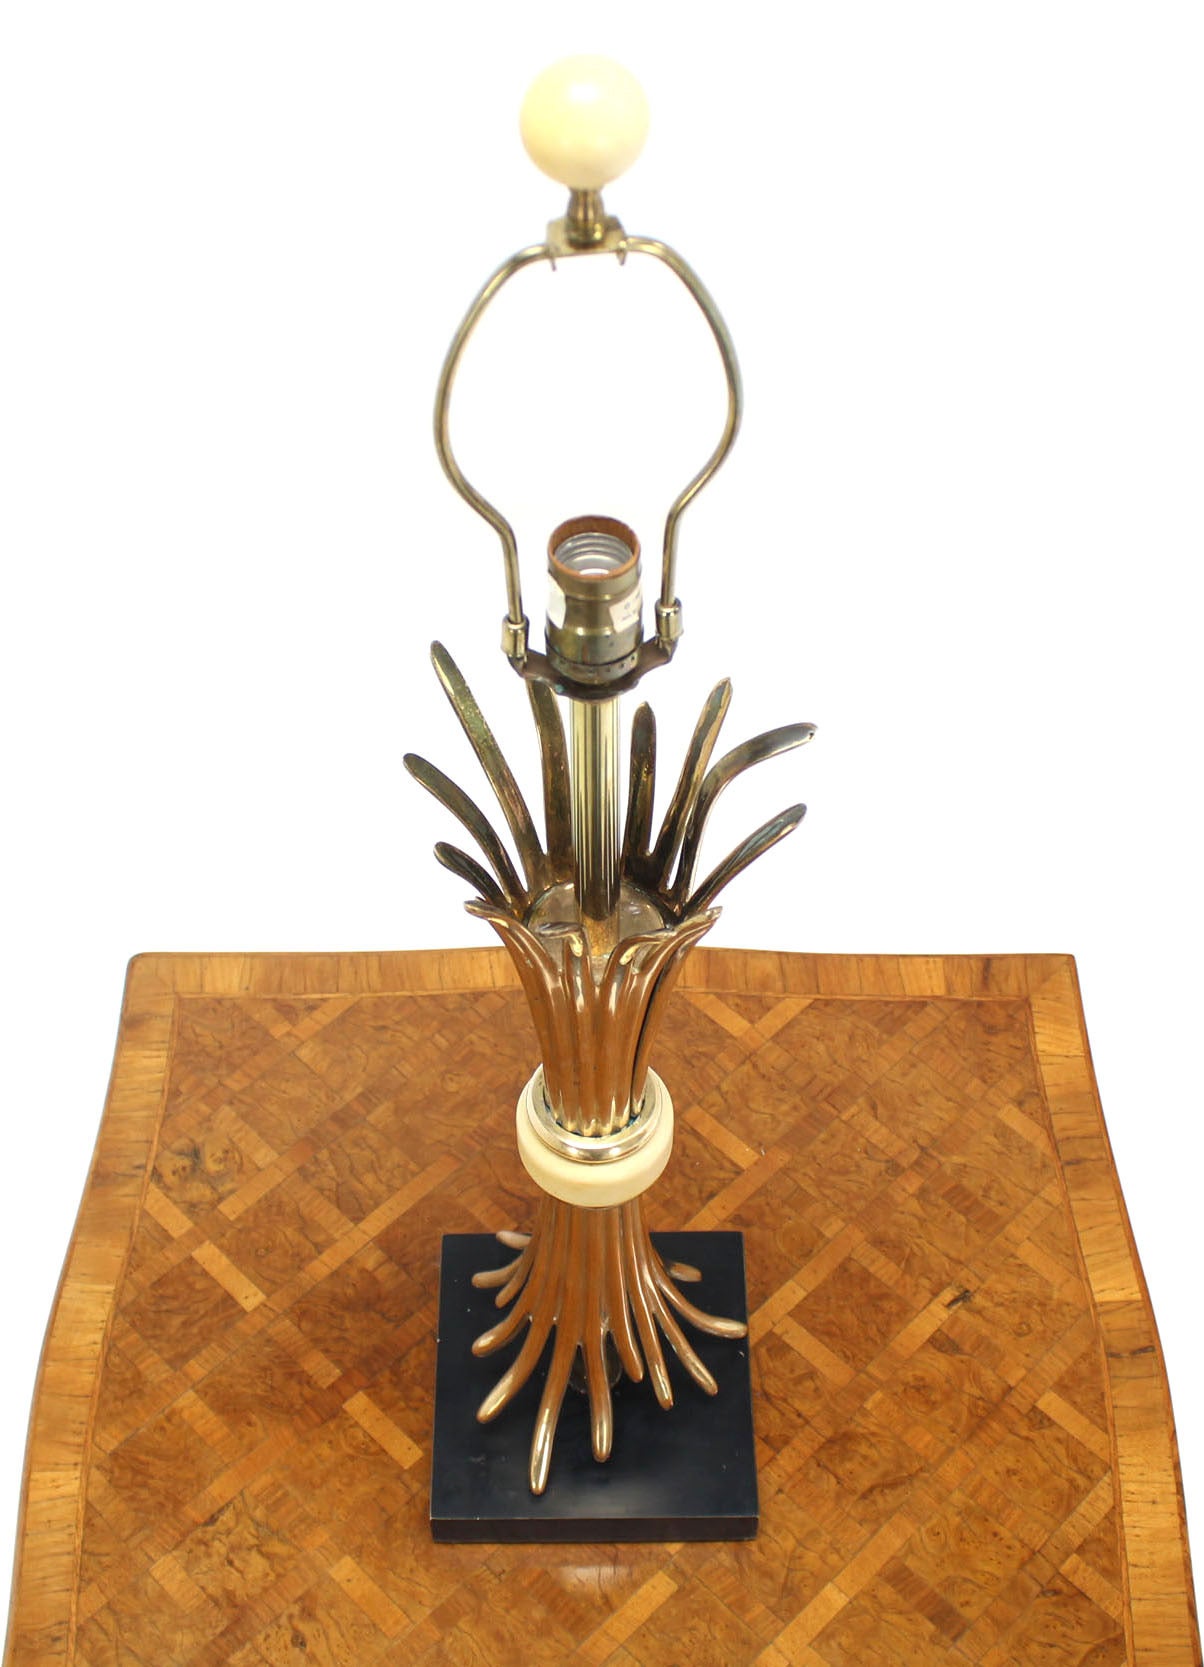 Gold or Brass Wheat Sheaf Base Table Lamp by Chapman 2